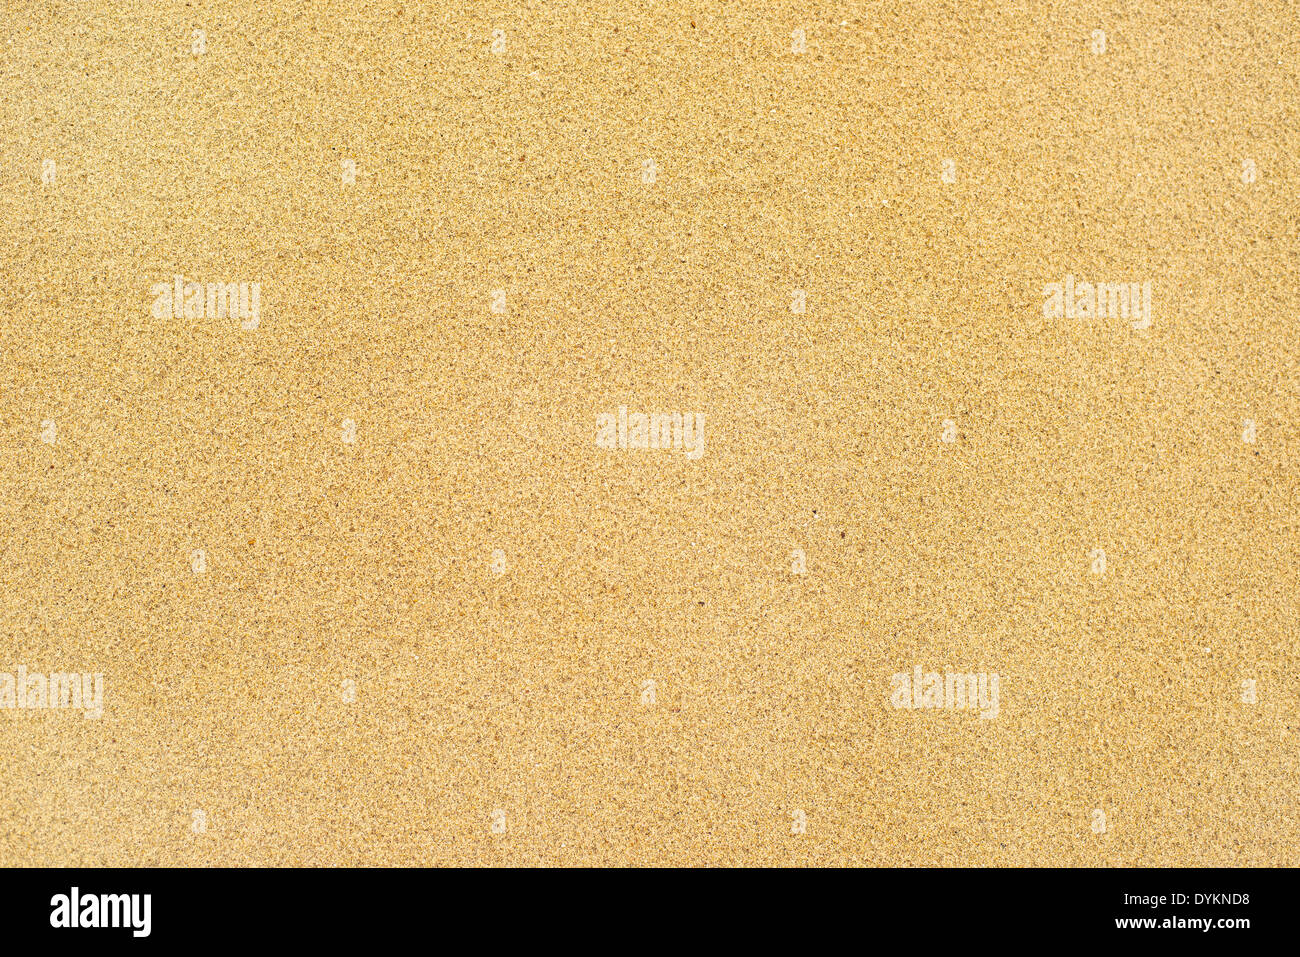 Yellow river sand texture as background Stock Photo